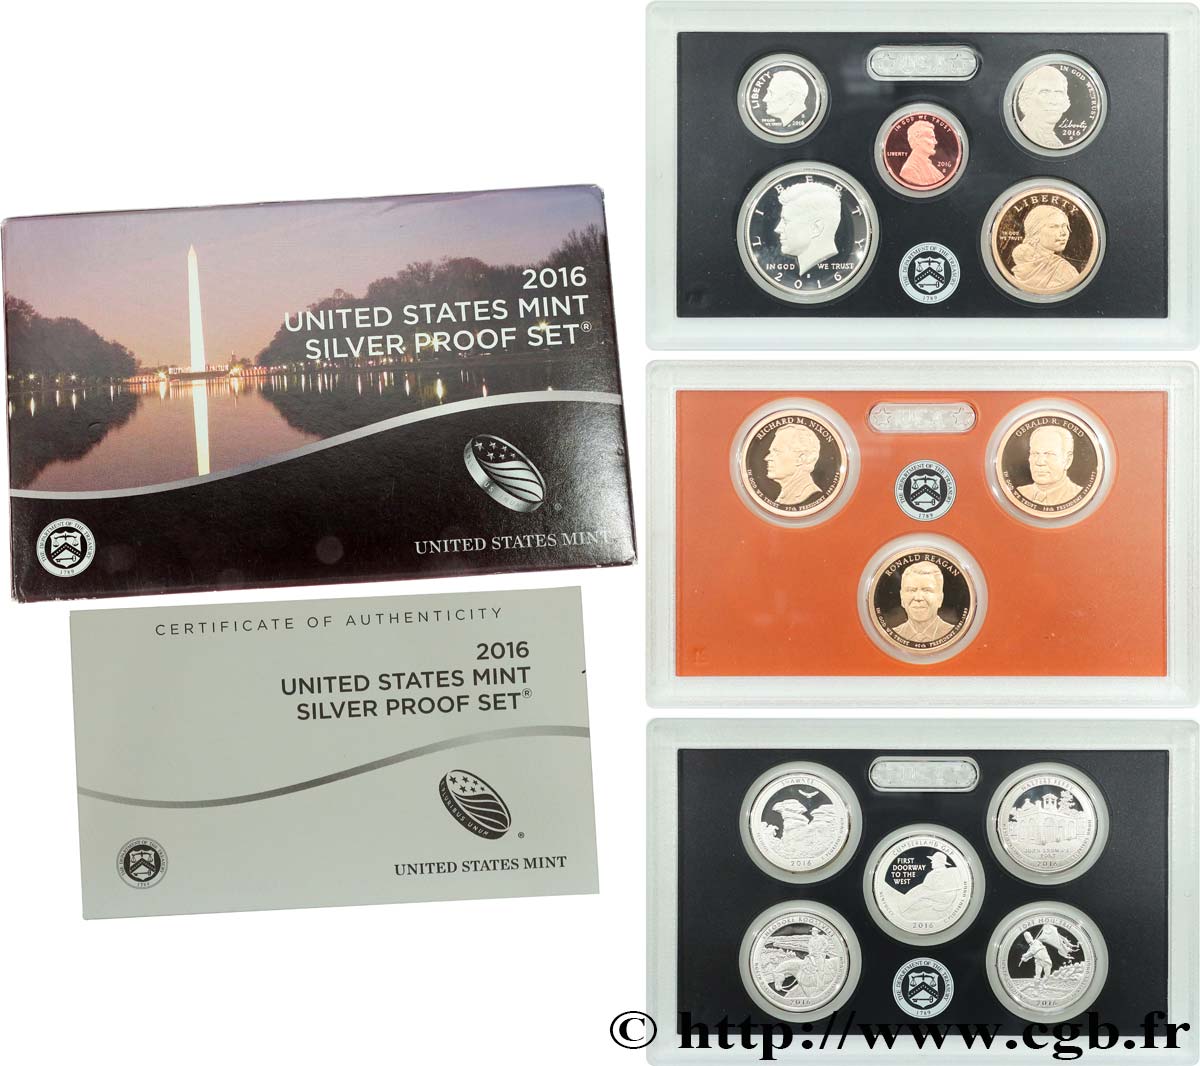 UNITED STATES OF AMERICA SILVER PROOF SET - 13 monnaies 2016 S- San Francisco MS 